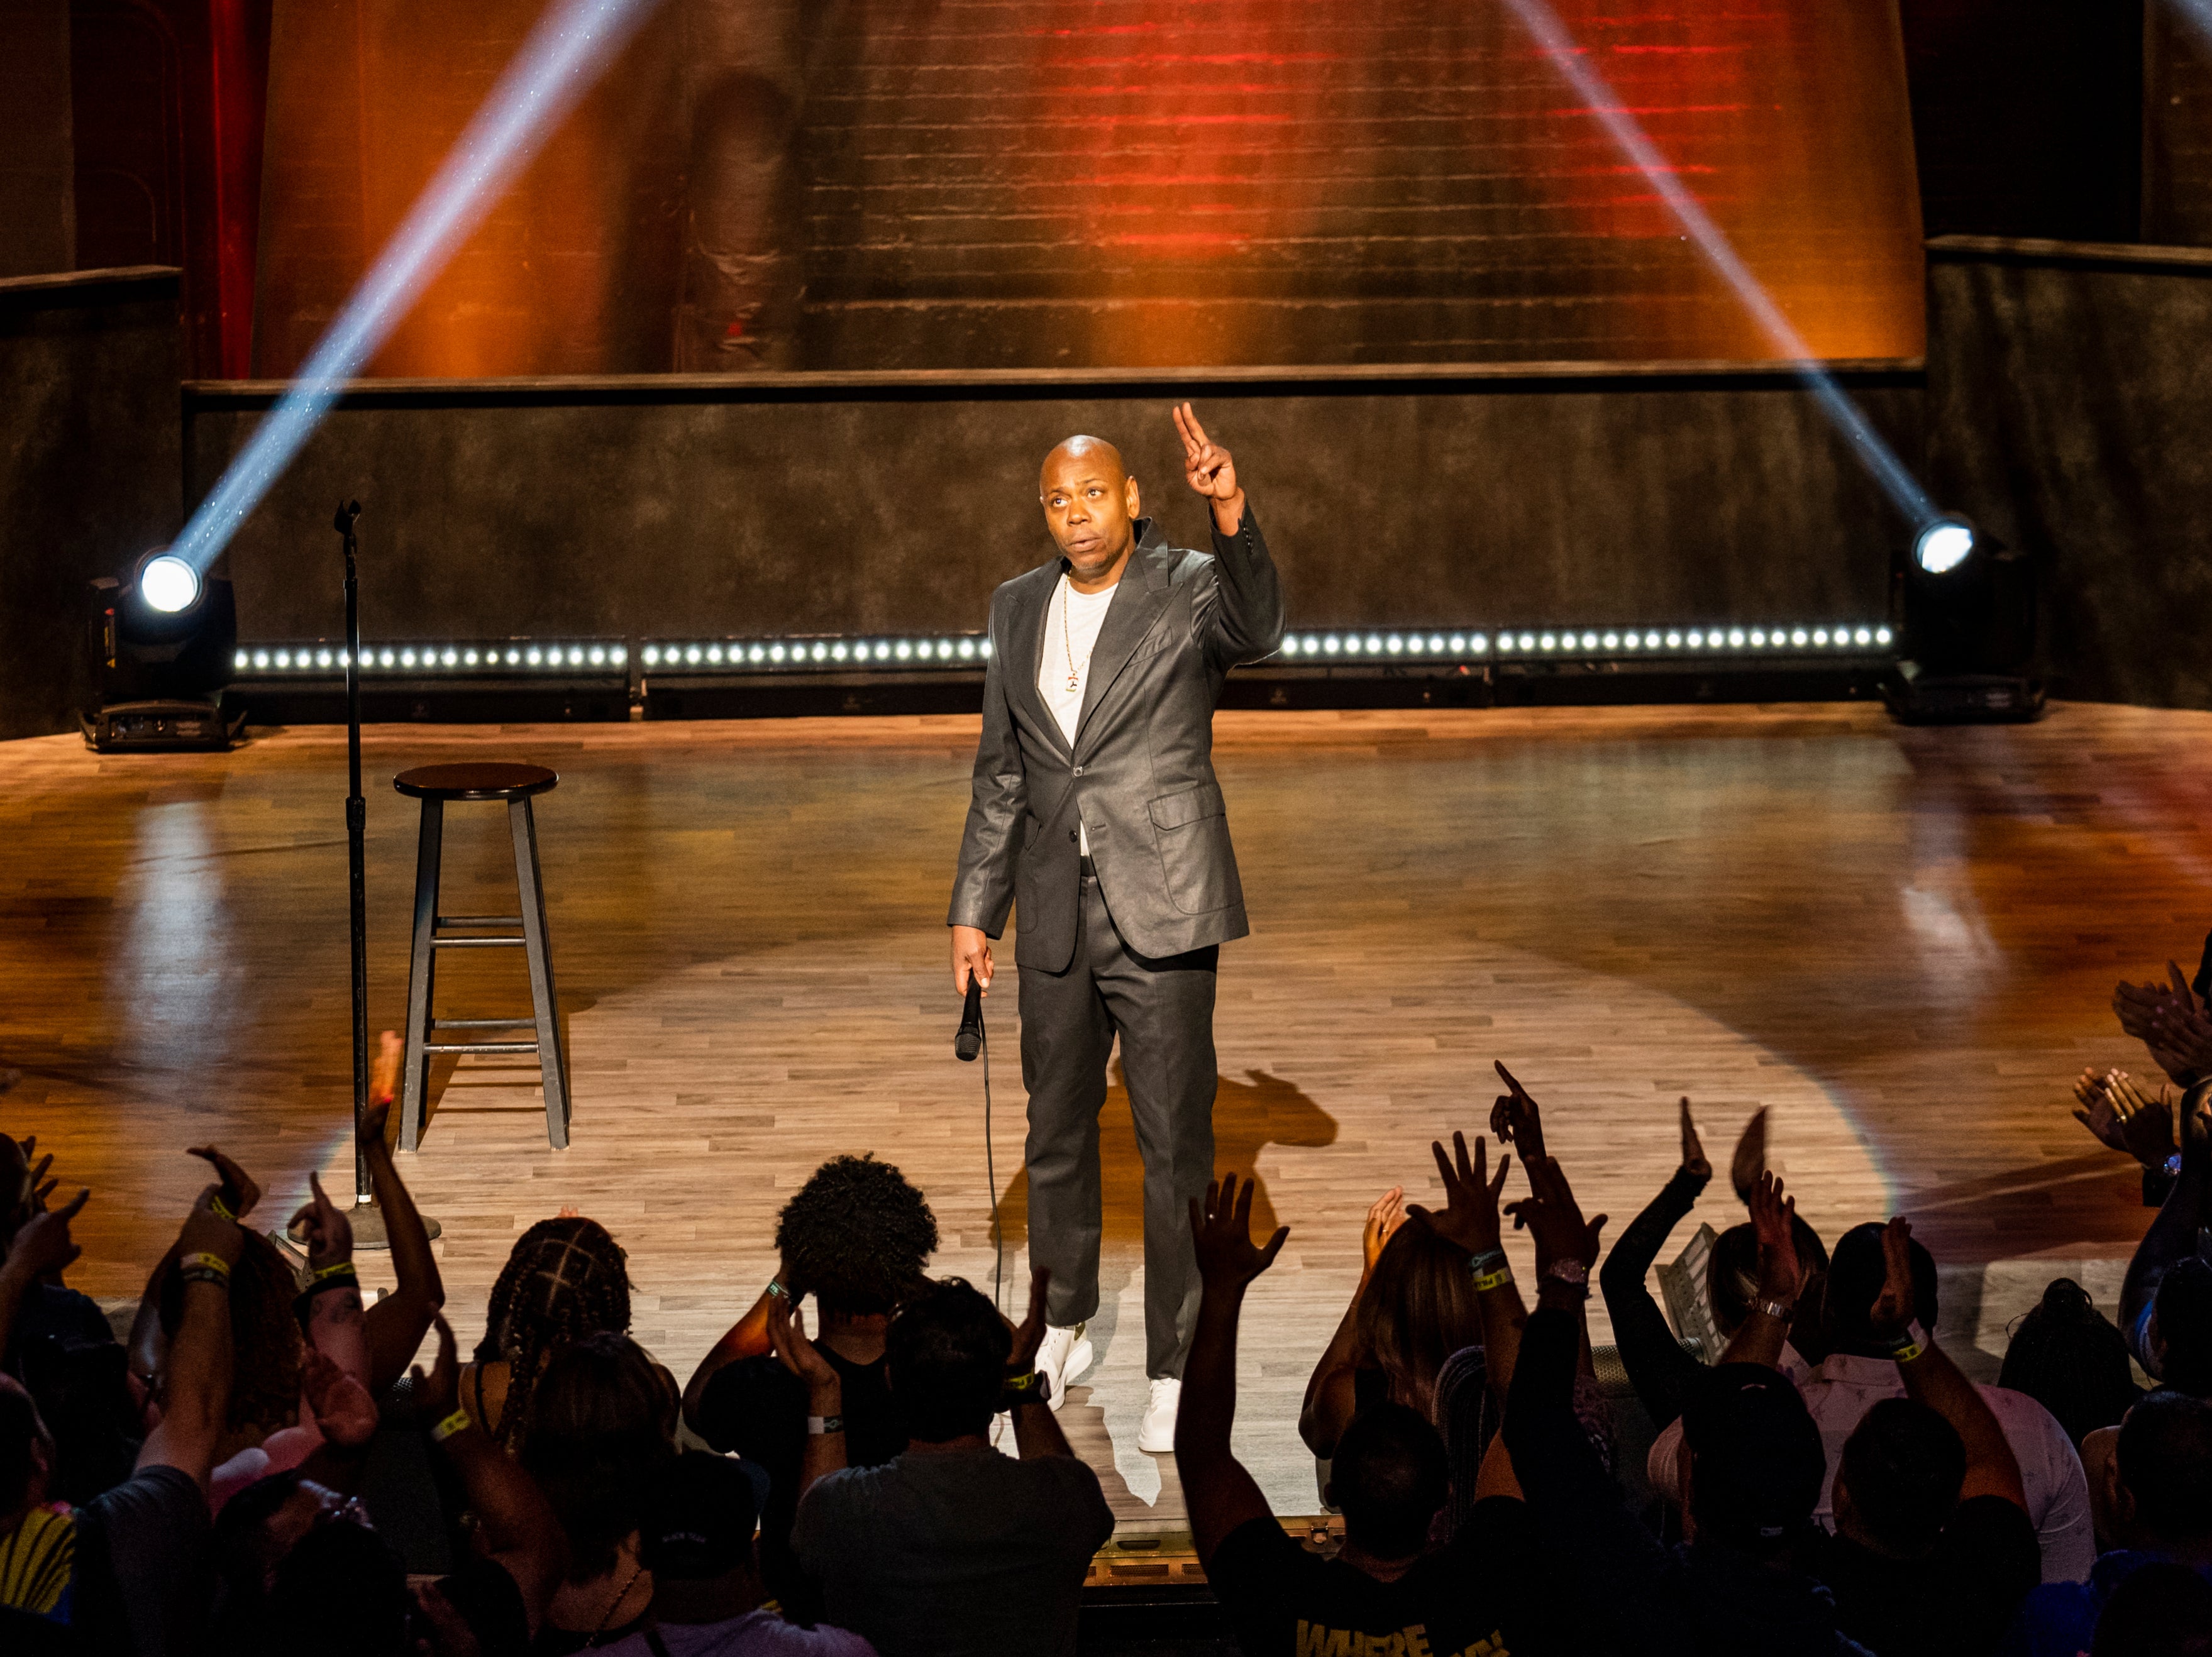 In the spotlight: Chappelle on stage in his latest Netflix special ‘The Closer’